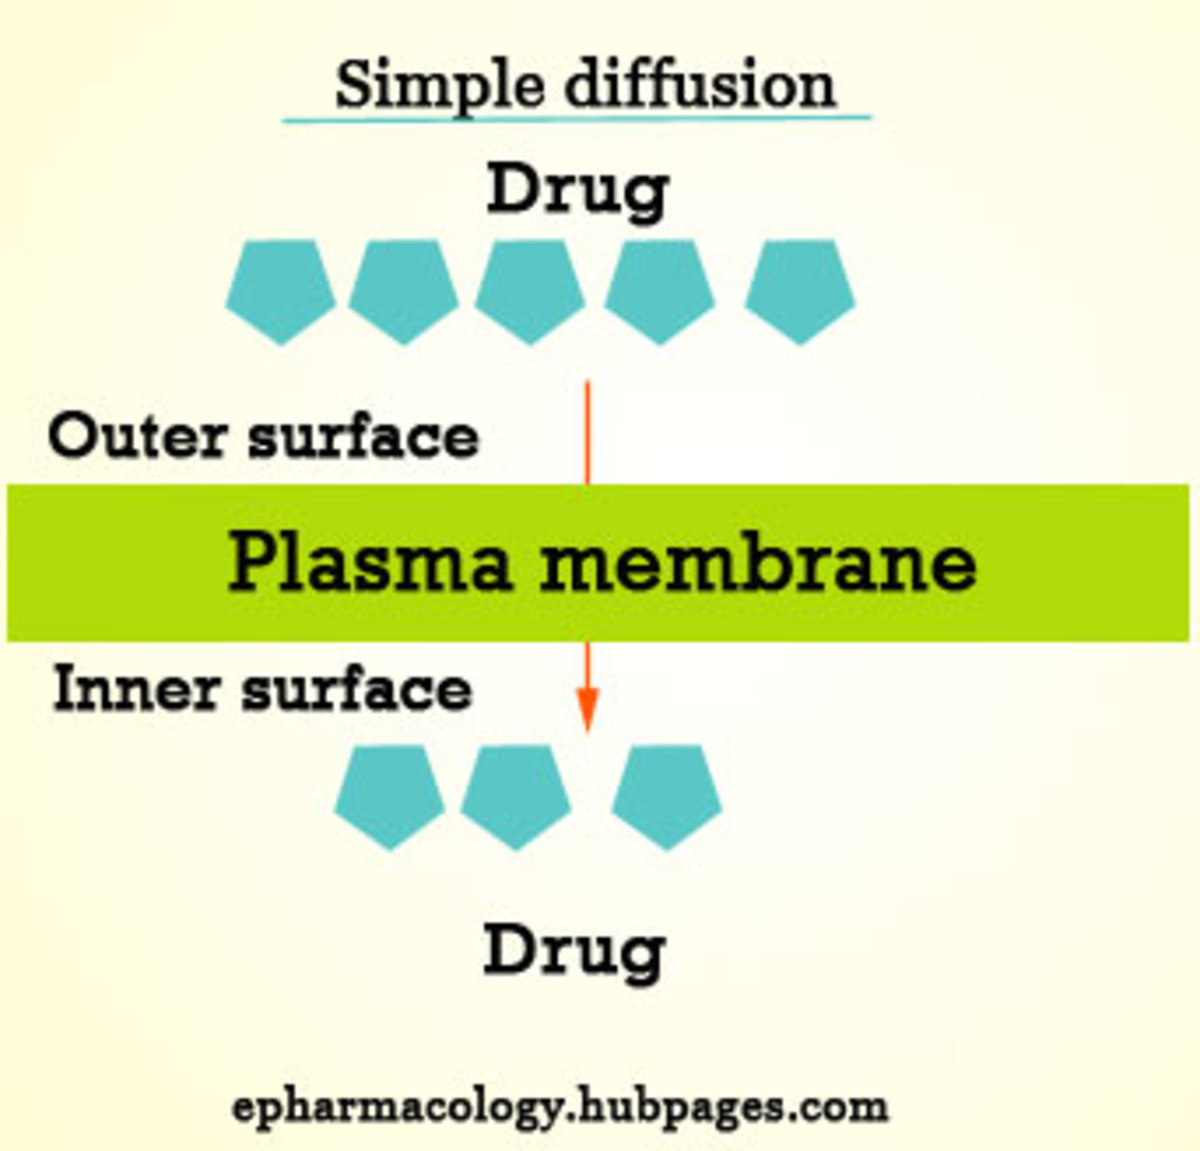 Simple diffusion of drugs!